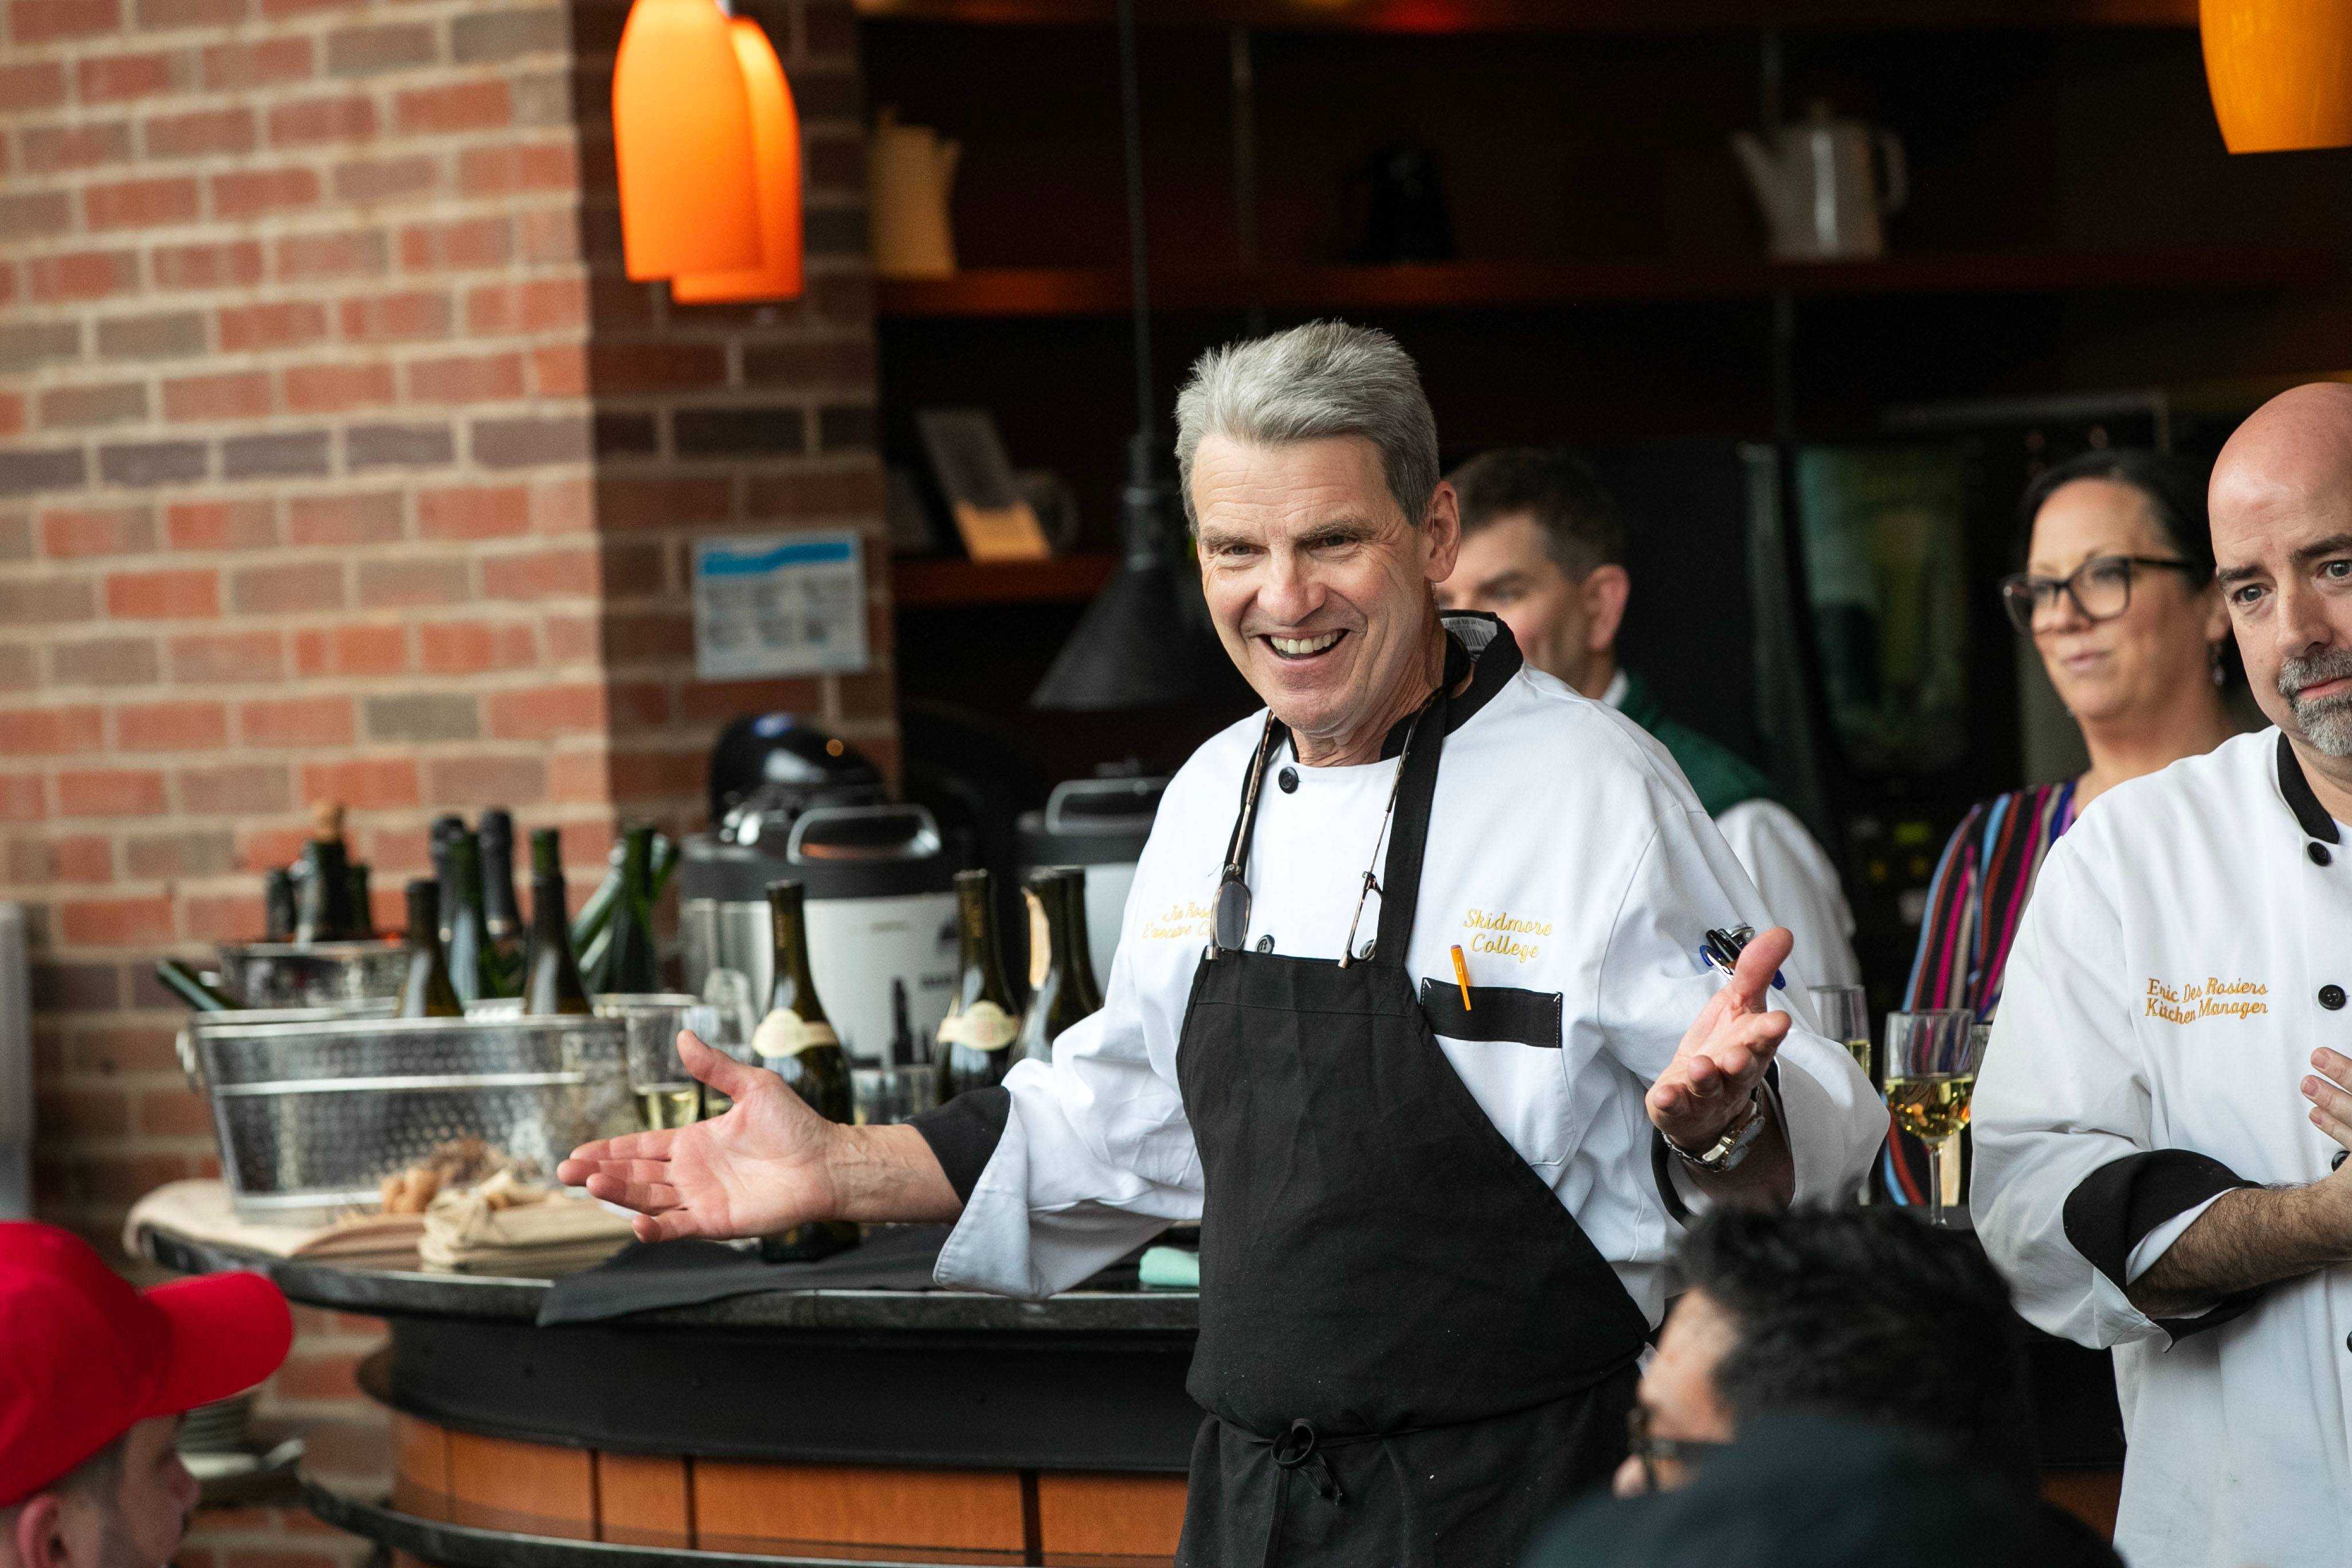 Executive Chef Jim Rose walks into the Atrium, smiling with his arms outstretched.